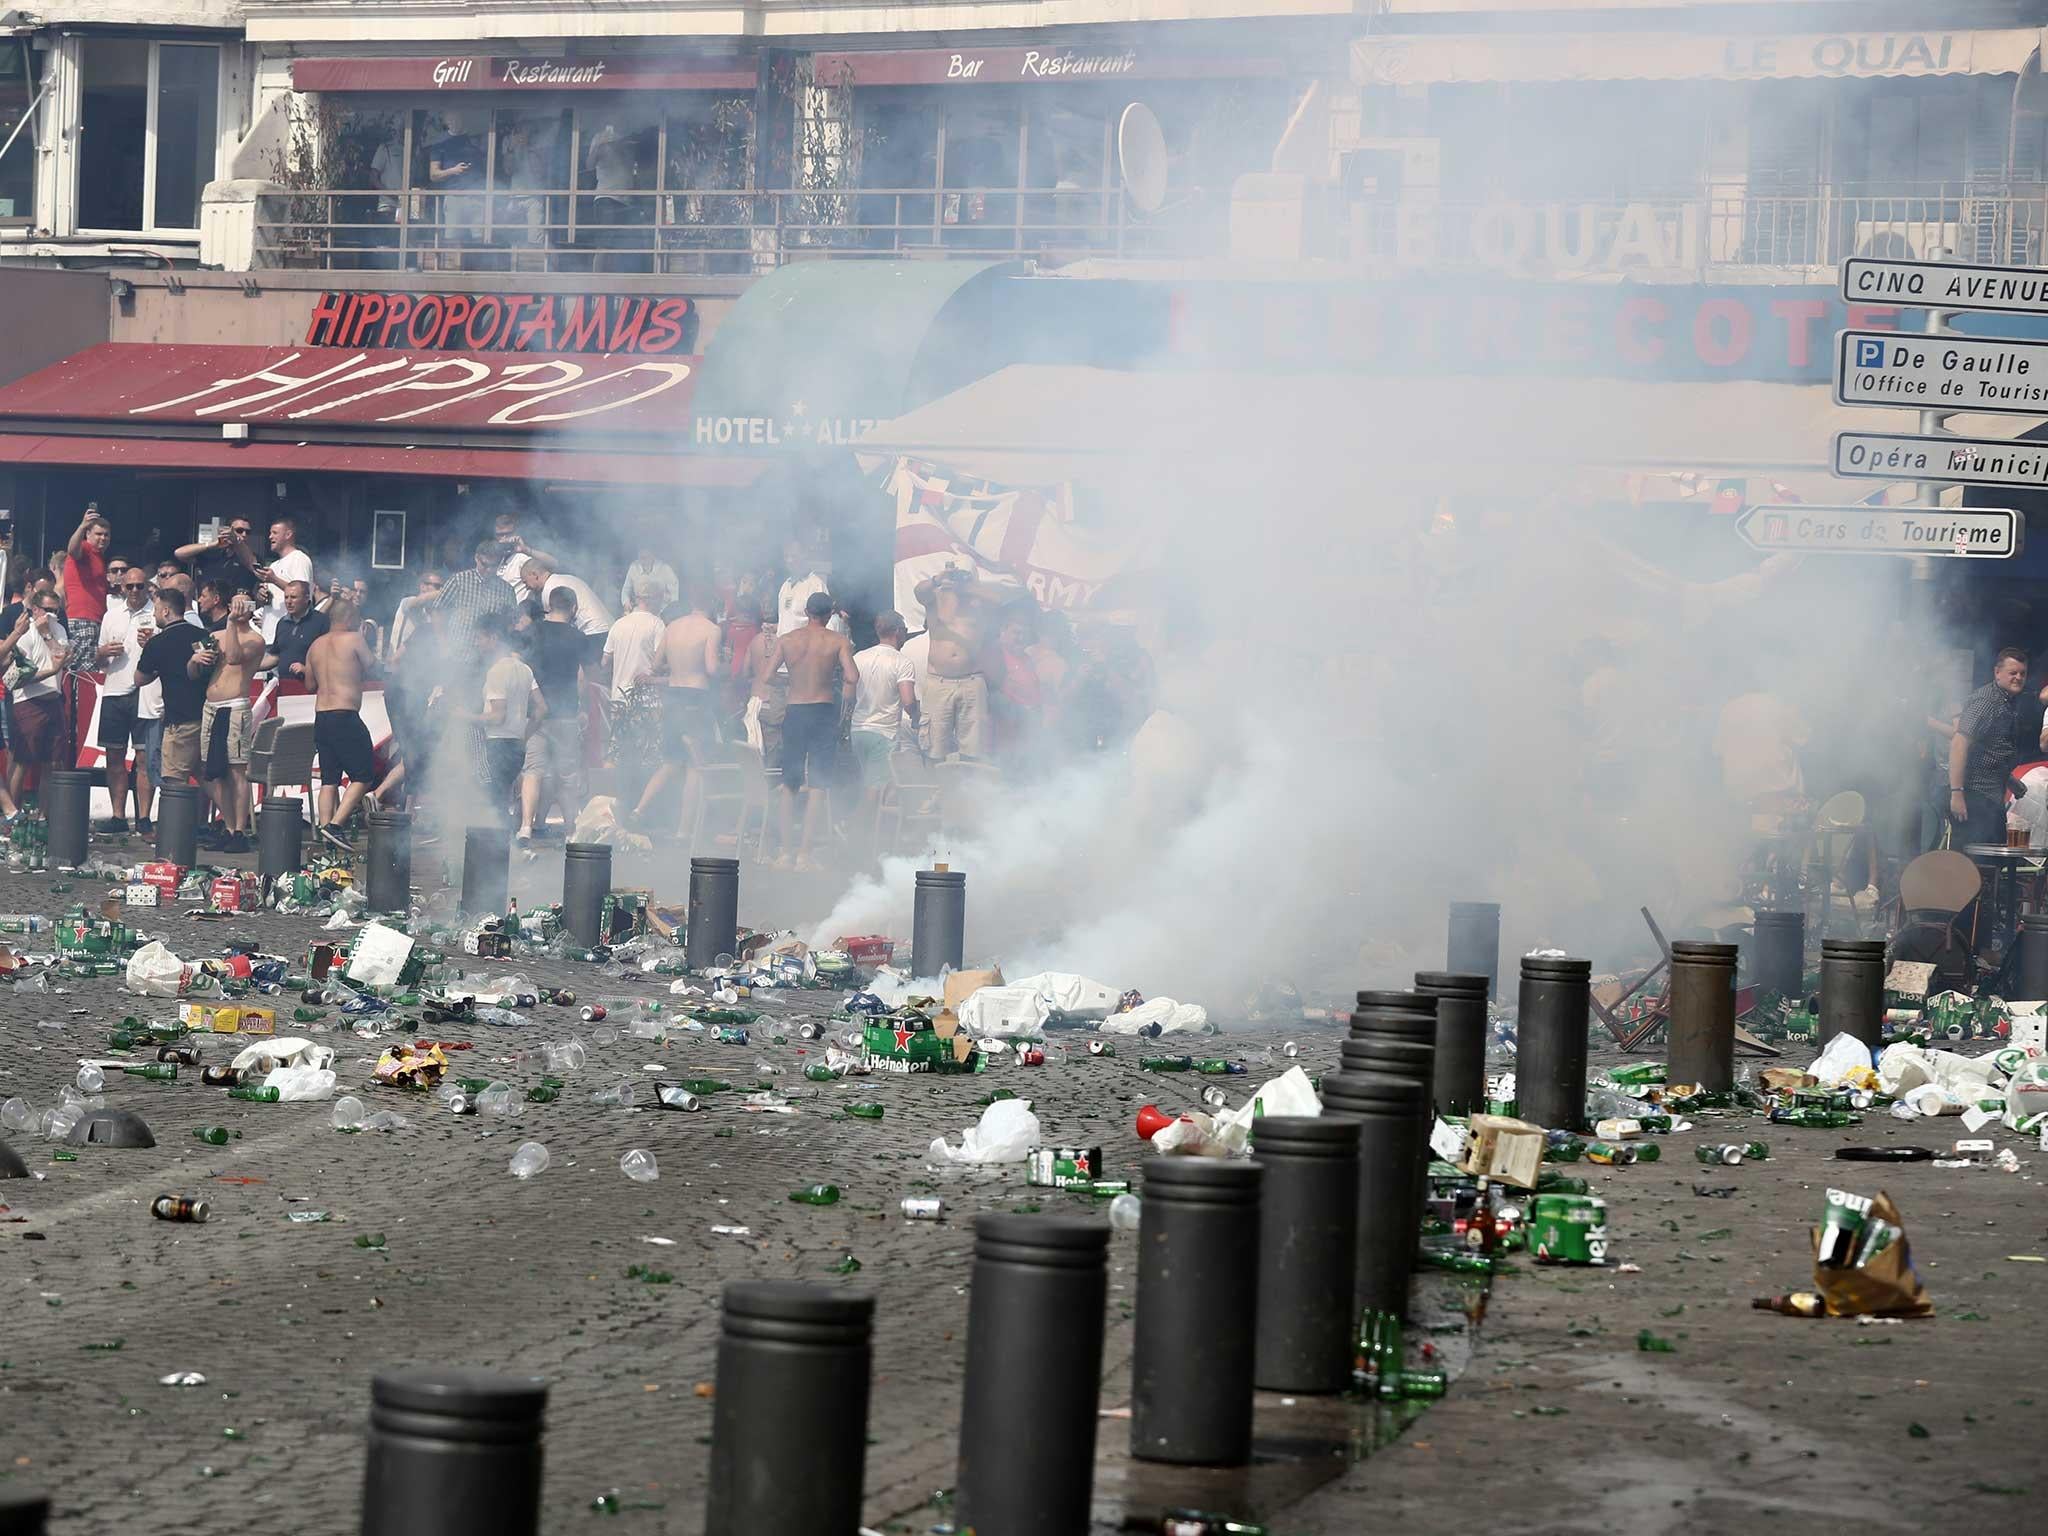 England supporters are set to follow their team to Lens this week after a week of violence in Marseille